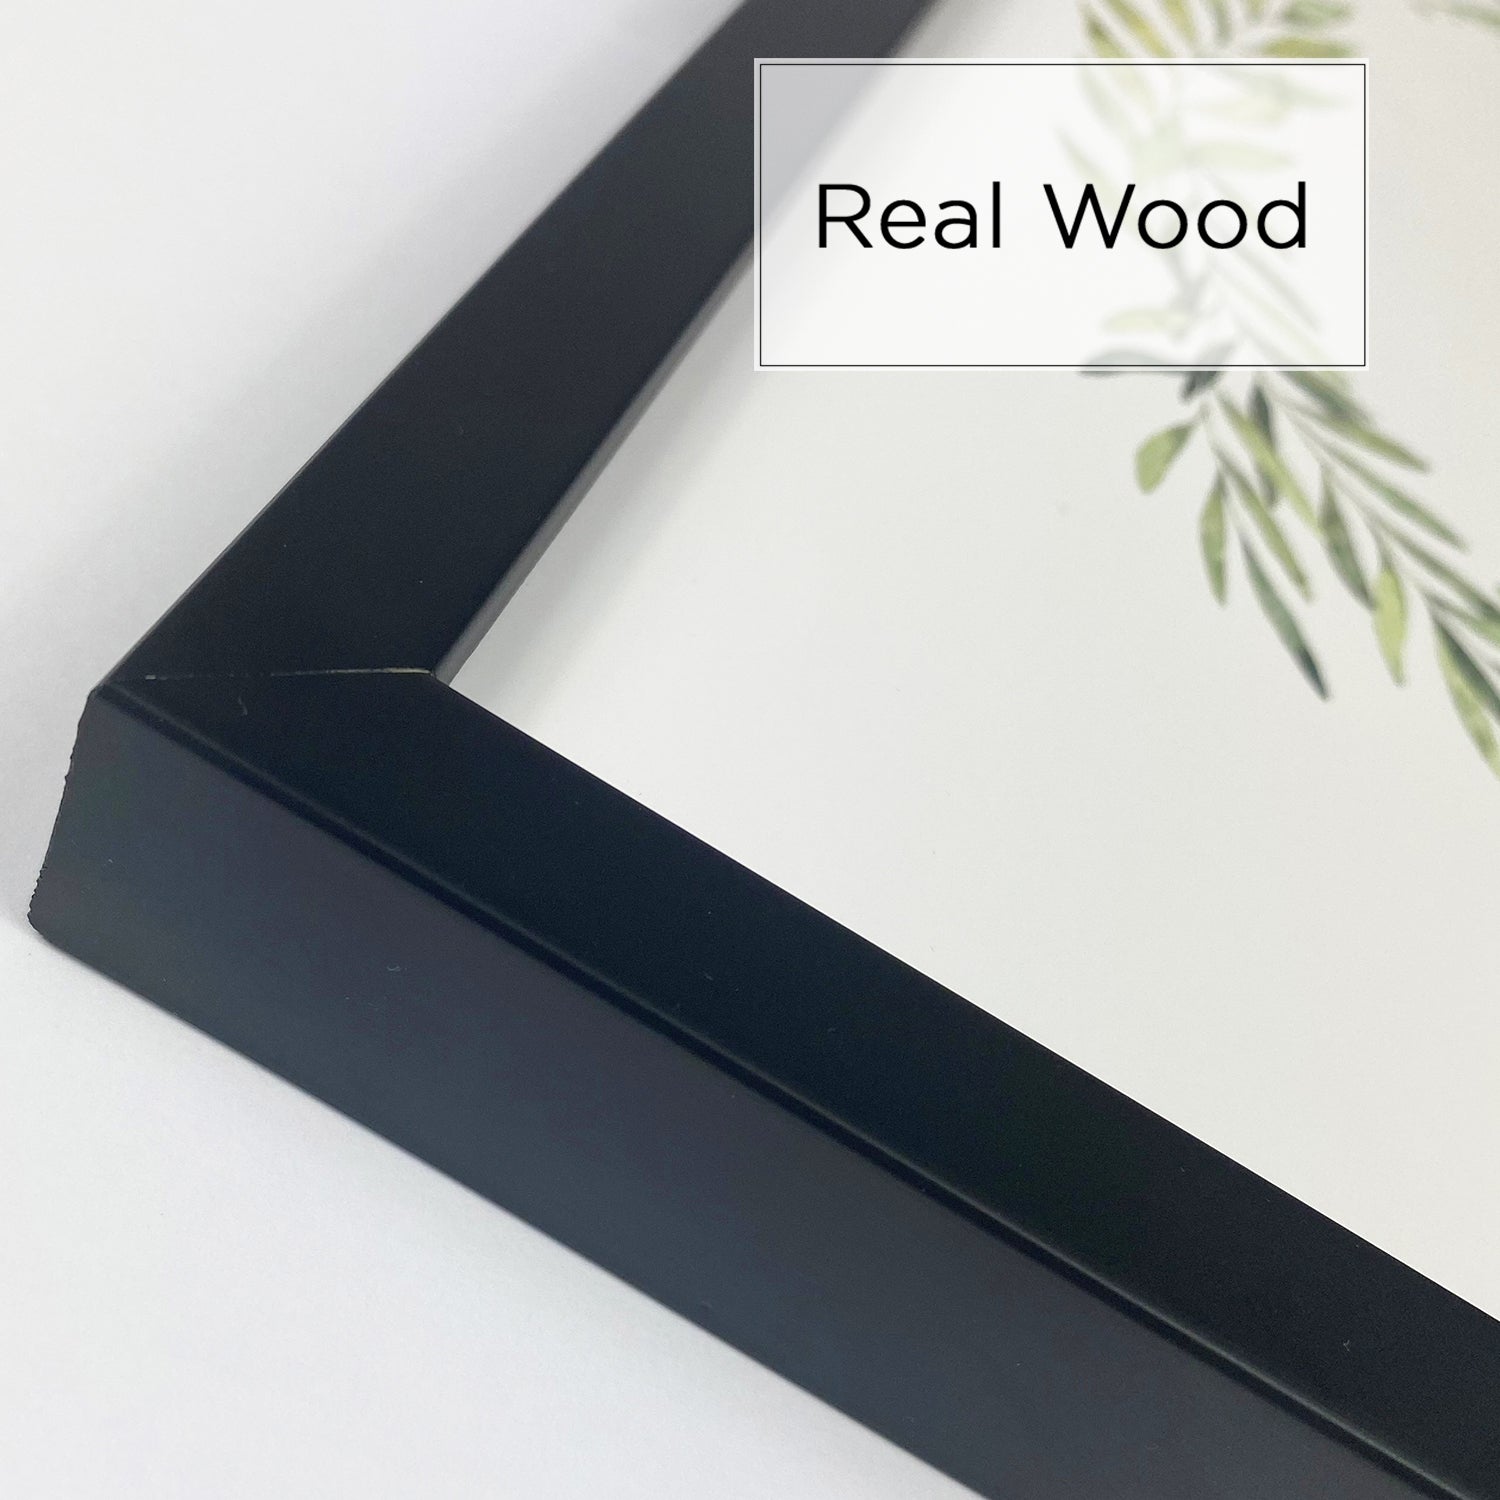 12x12 Picture Frame Black Wood 12 x 12 Frame Real Glass